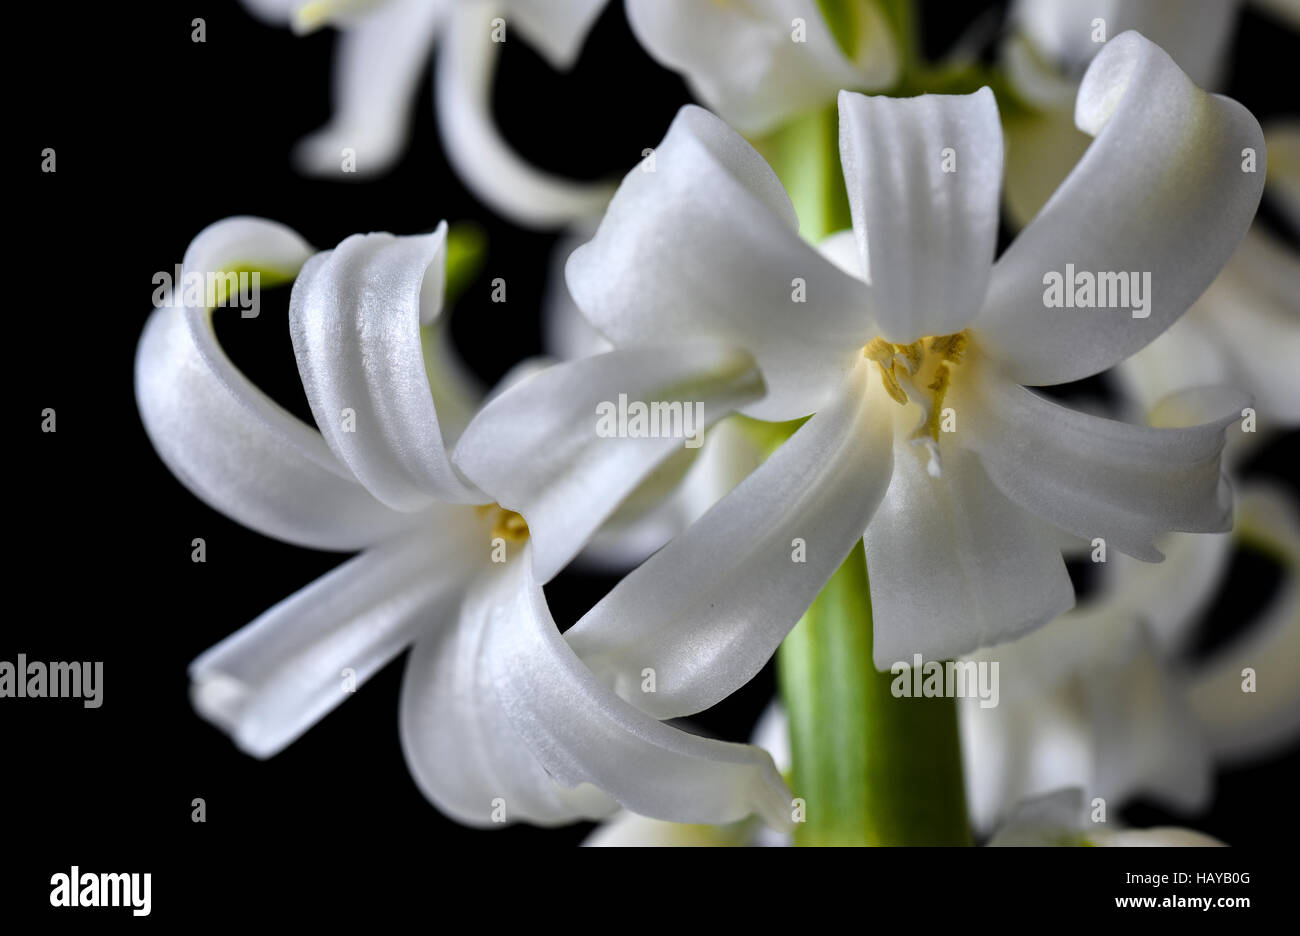 Tender white flowers of hyacinth on a deep black background Stock Photo